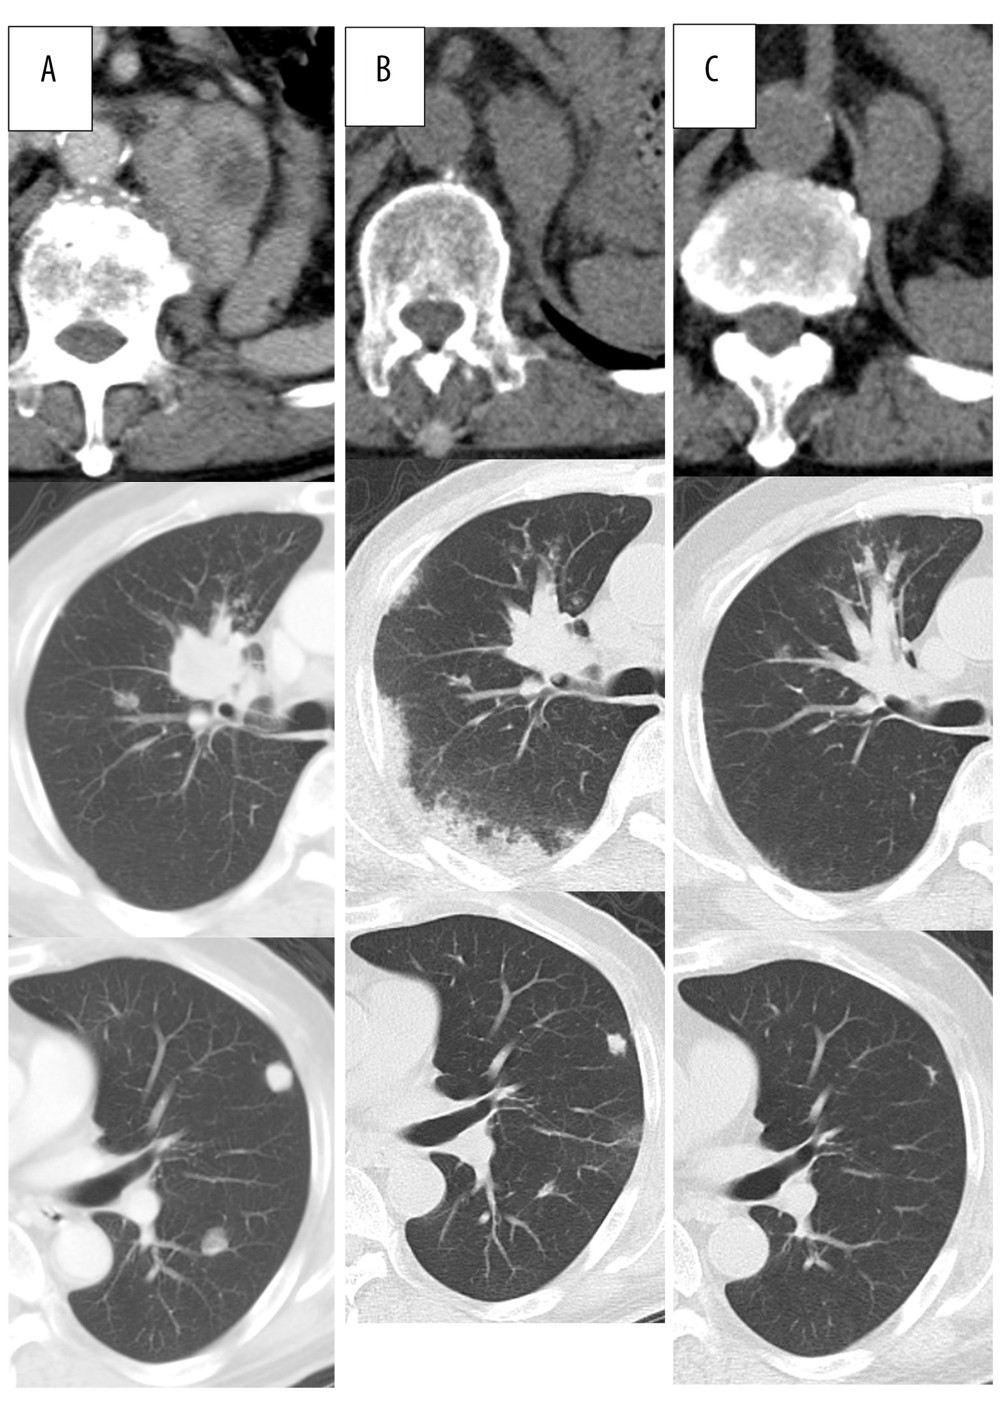 The CT scan shows left adrenal and lung metastases before initial nivolumab therapy (A), after 3 cycles of nivolumab therapy (B), and 7 months after nivolumab discontinuation (C).